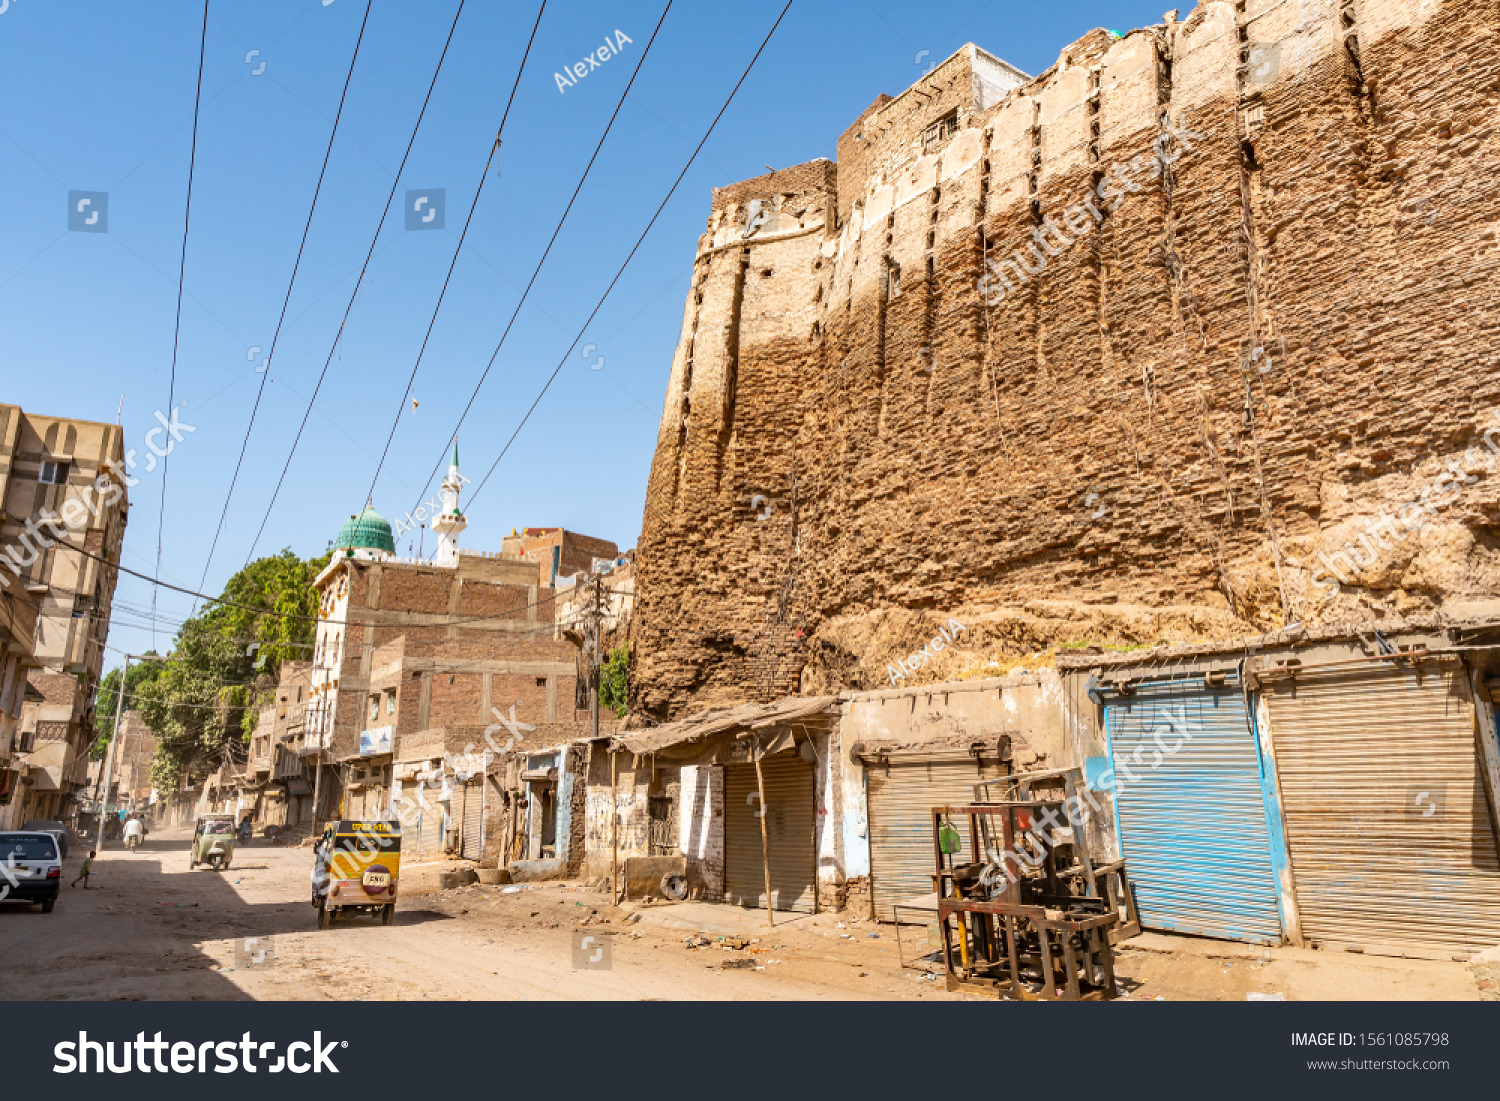 What is the old name of hyderabad pakistan?